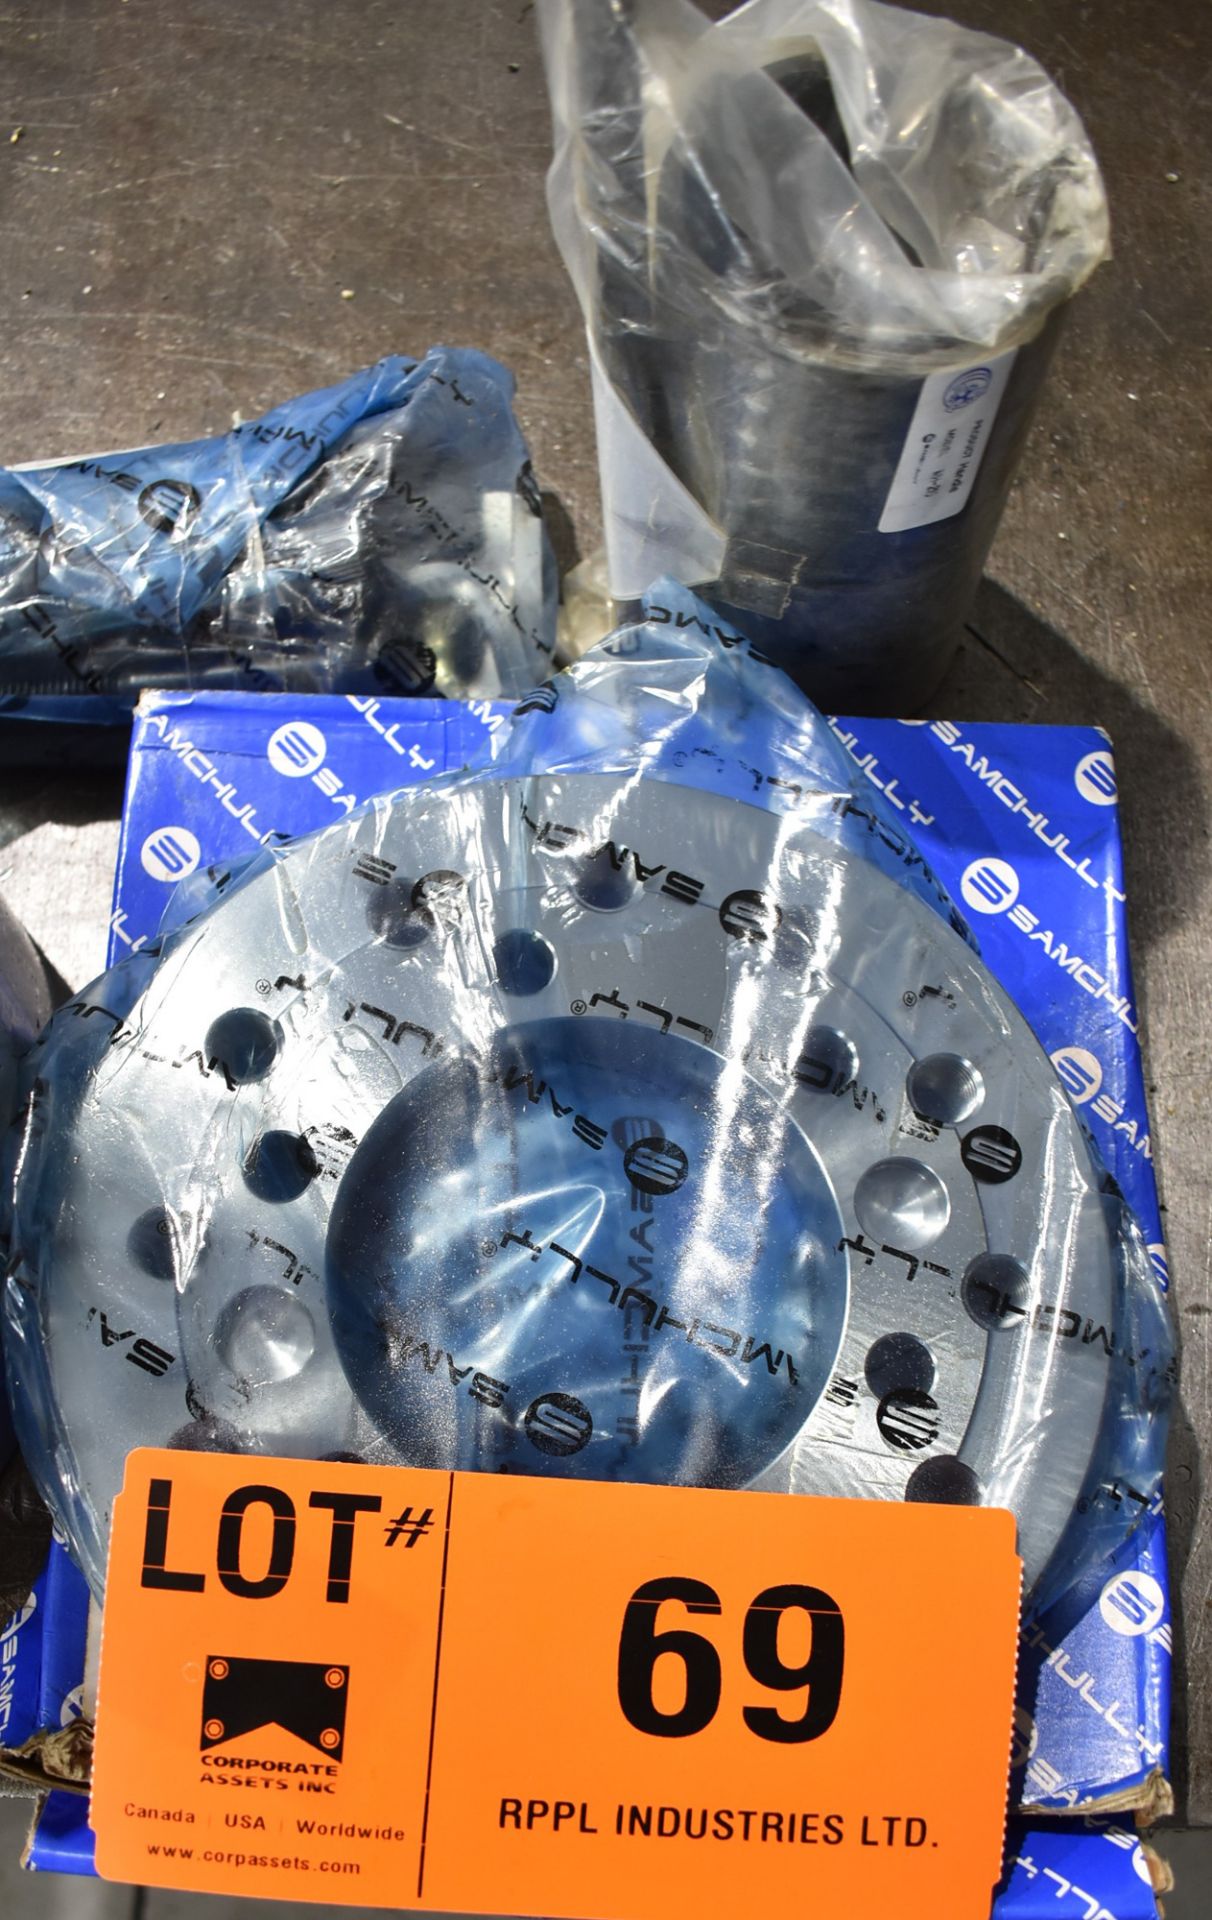 SAMCHULLY MH-210V1 10" 3-JAW HYDRAULIC CHUCK, S/N 20F005 (BRAND NEW) - Image 5 of 5